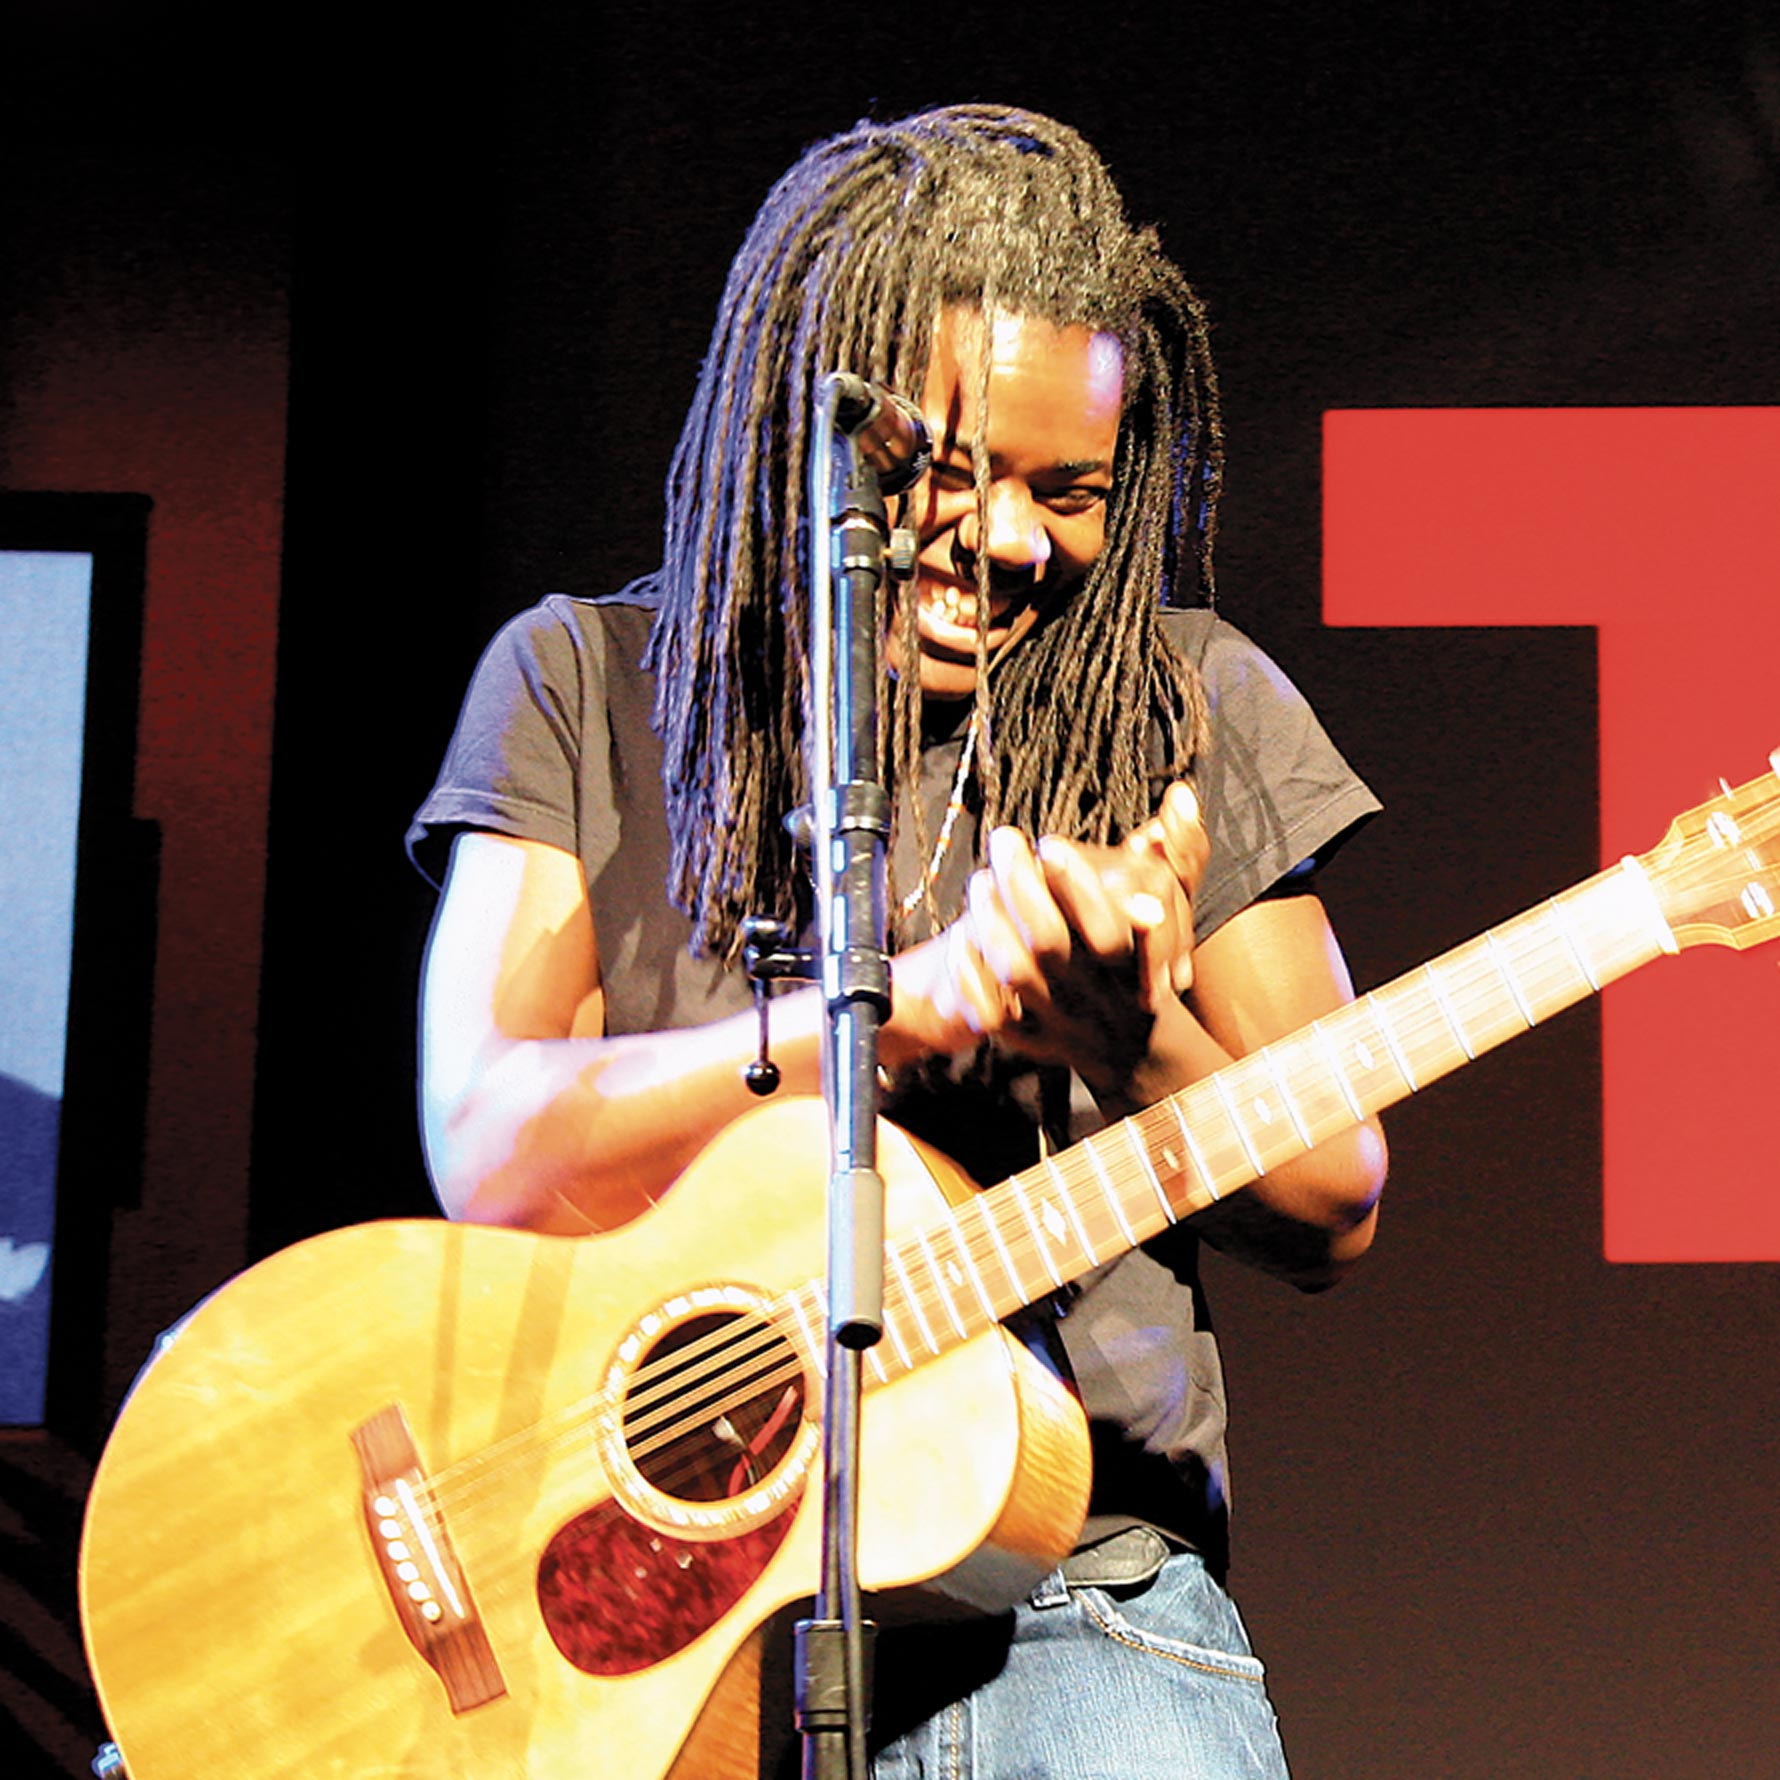 Image of Tracy Chapman on stage smiling